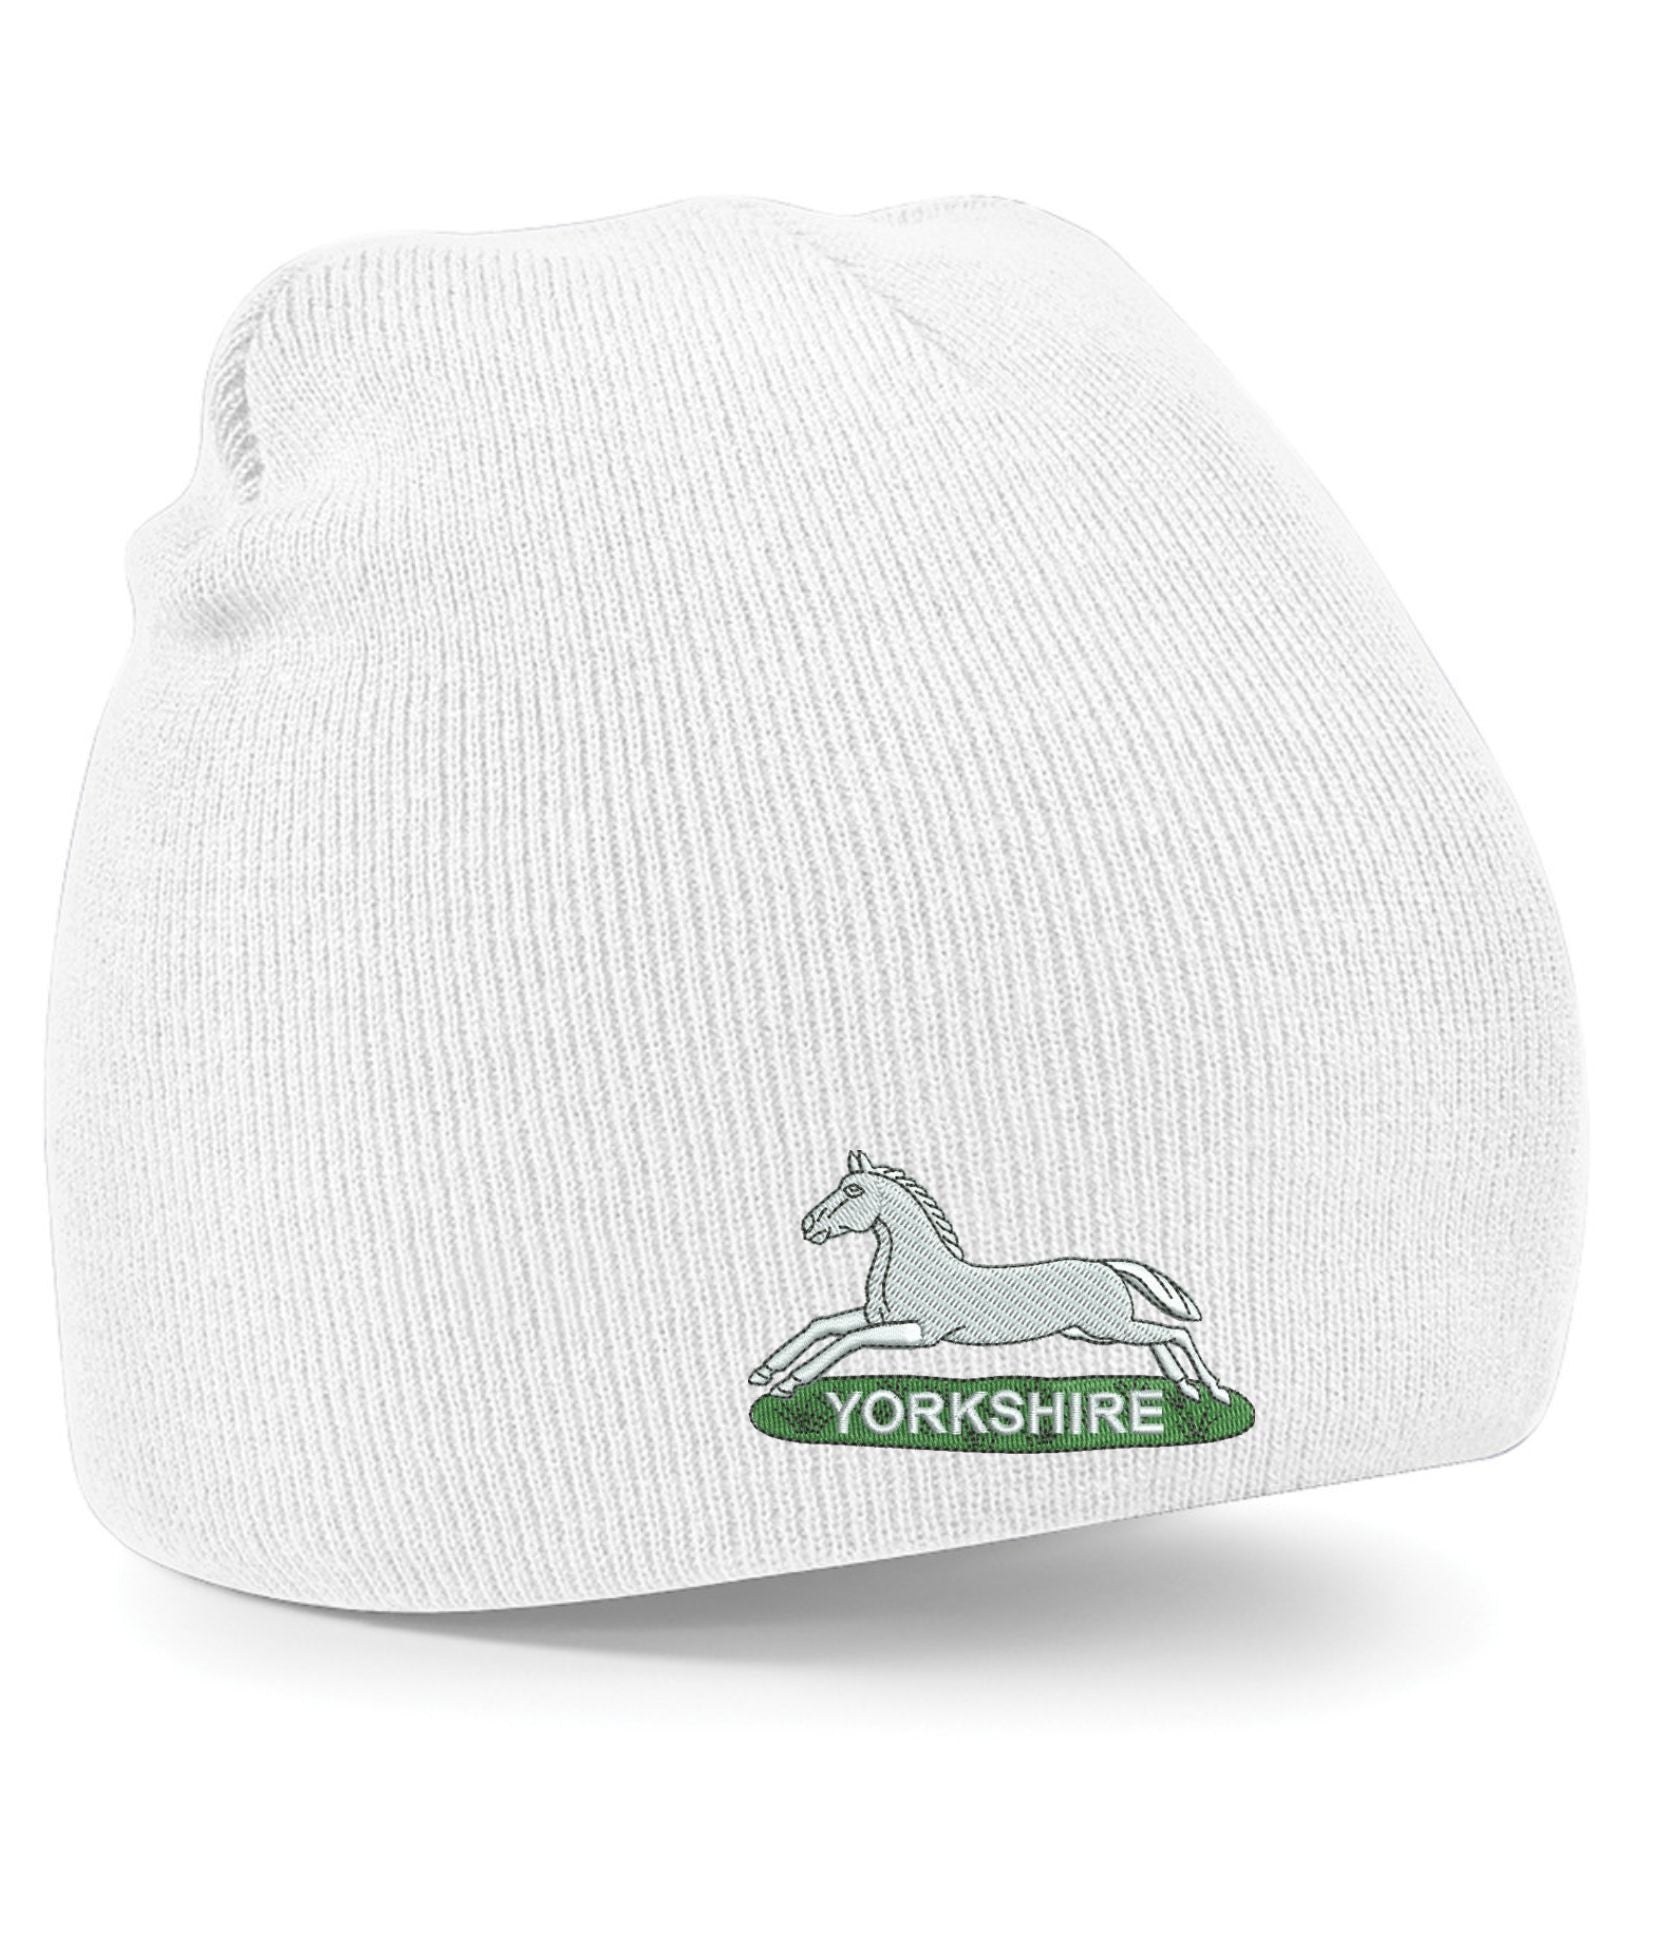 Prince of Wales's Own Regiment of Yorkshire Beanie Hats